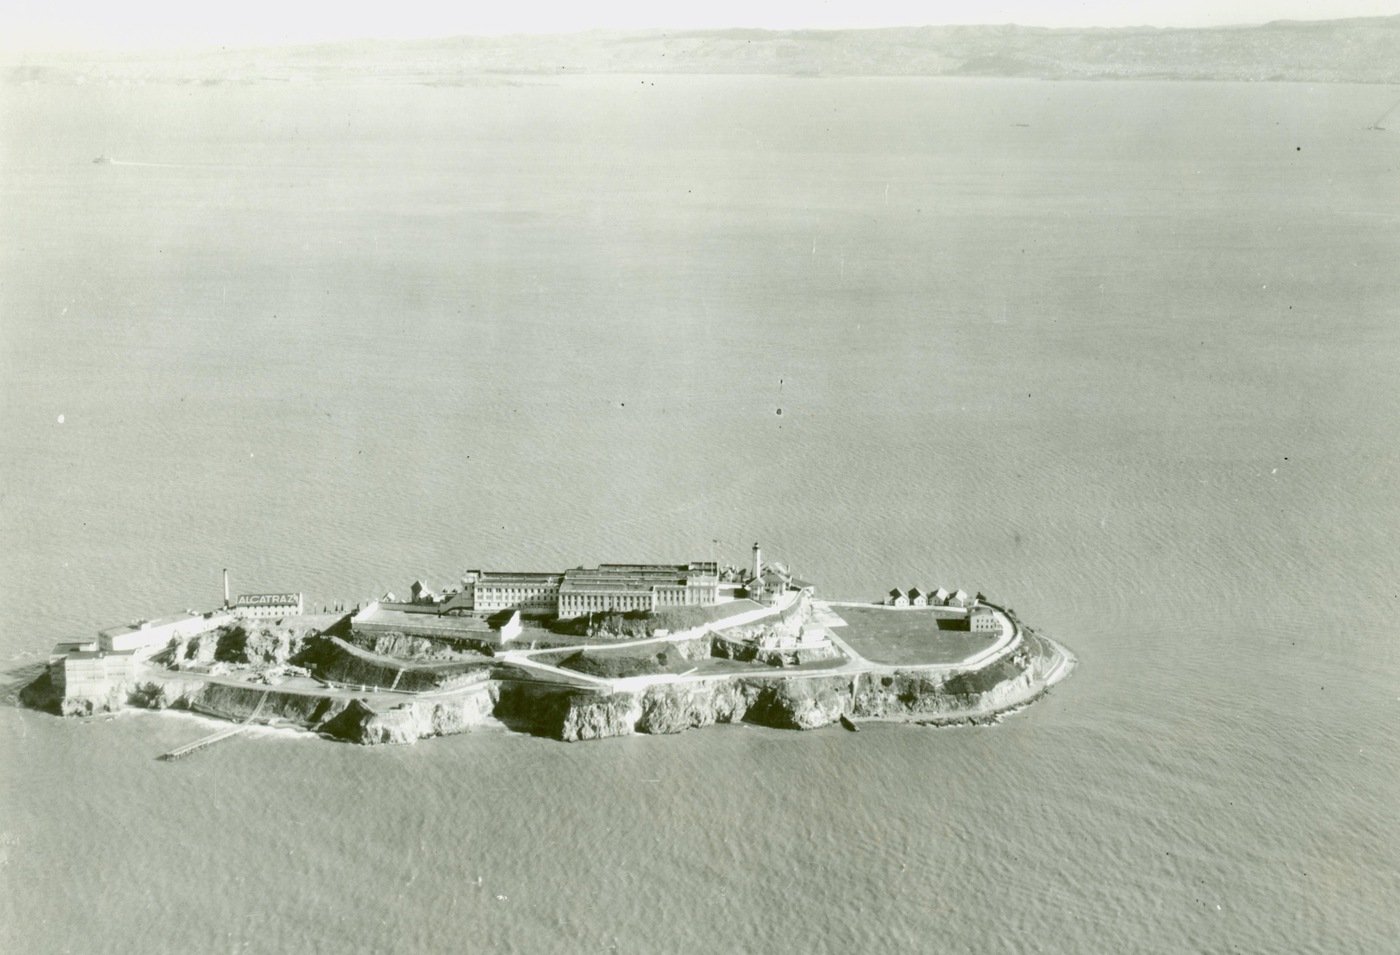 Aerial view of Alcatraz Island and its federal penitentiary in January 1932.